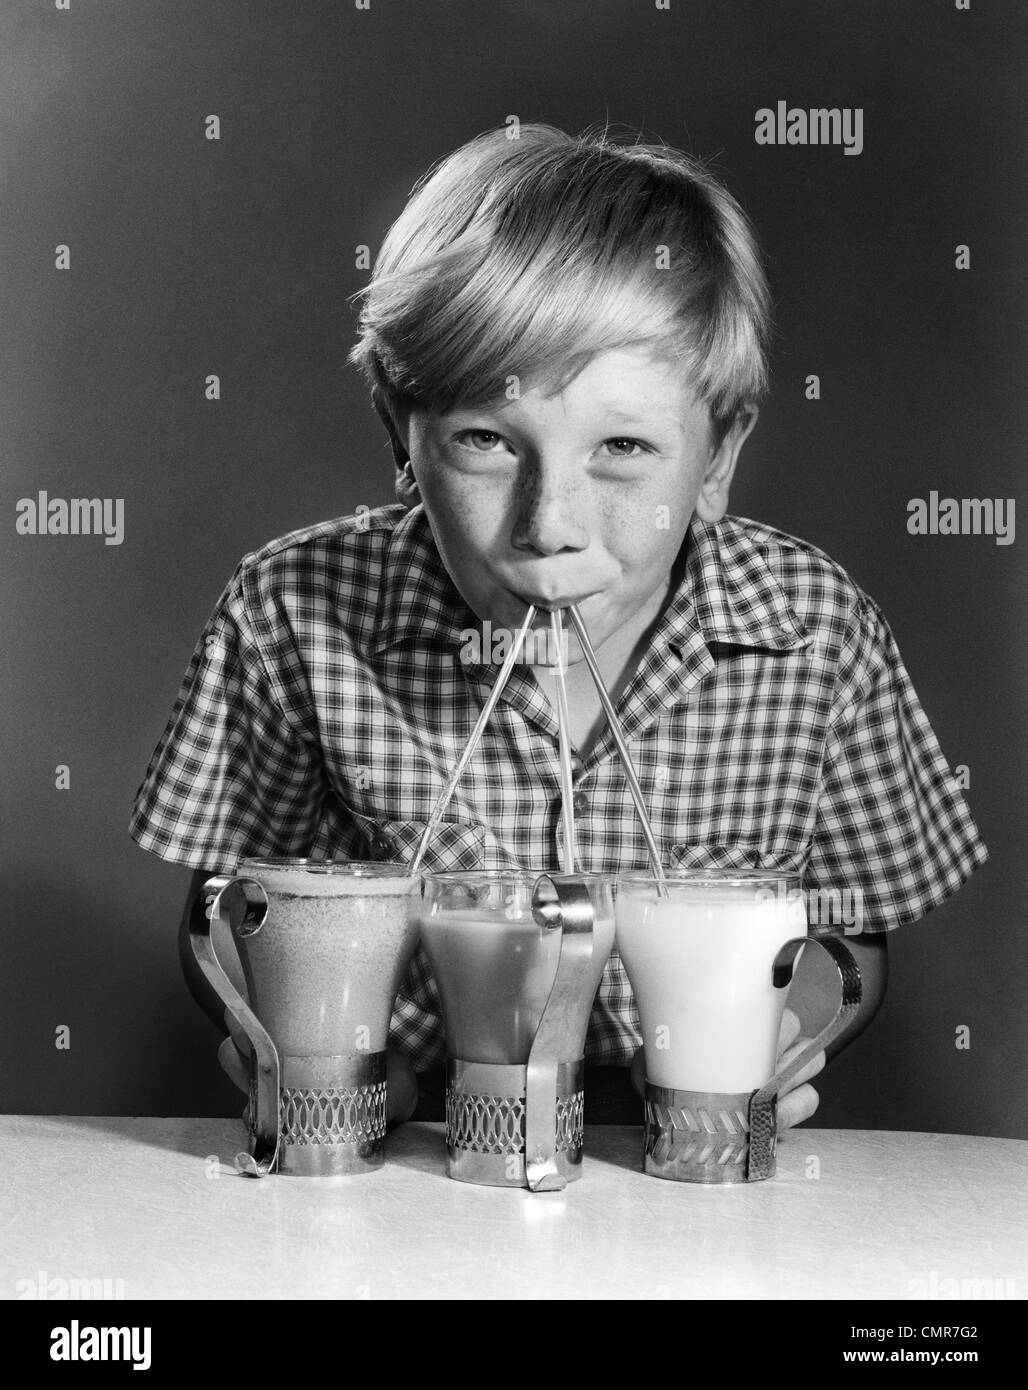 1950s 1960s PORTRAIT OF BLONDE BOY DRINKING WITH STRAWS FROM 3 MILKSHAKES SODAS SMILING LOOKING AT CAMERA Stock Photo